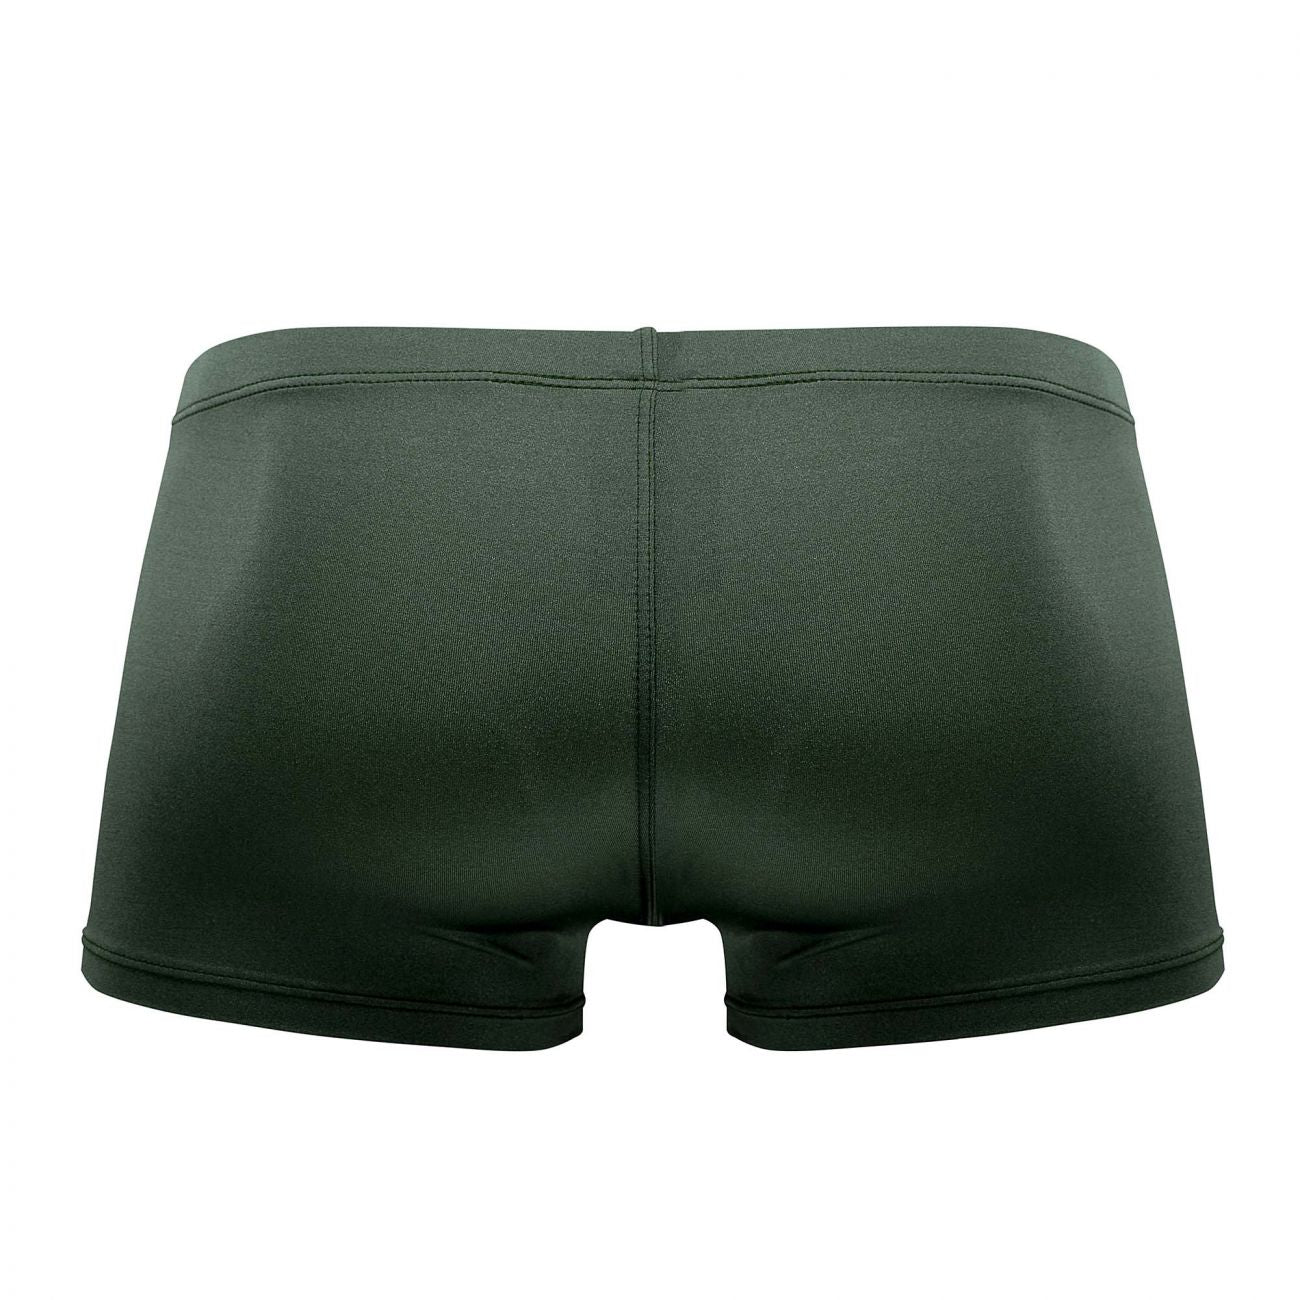 Clever 0896 Emerald Trunks Green